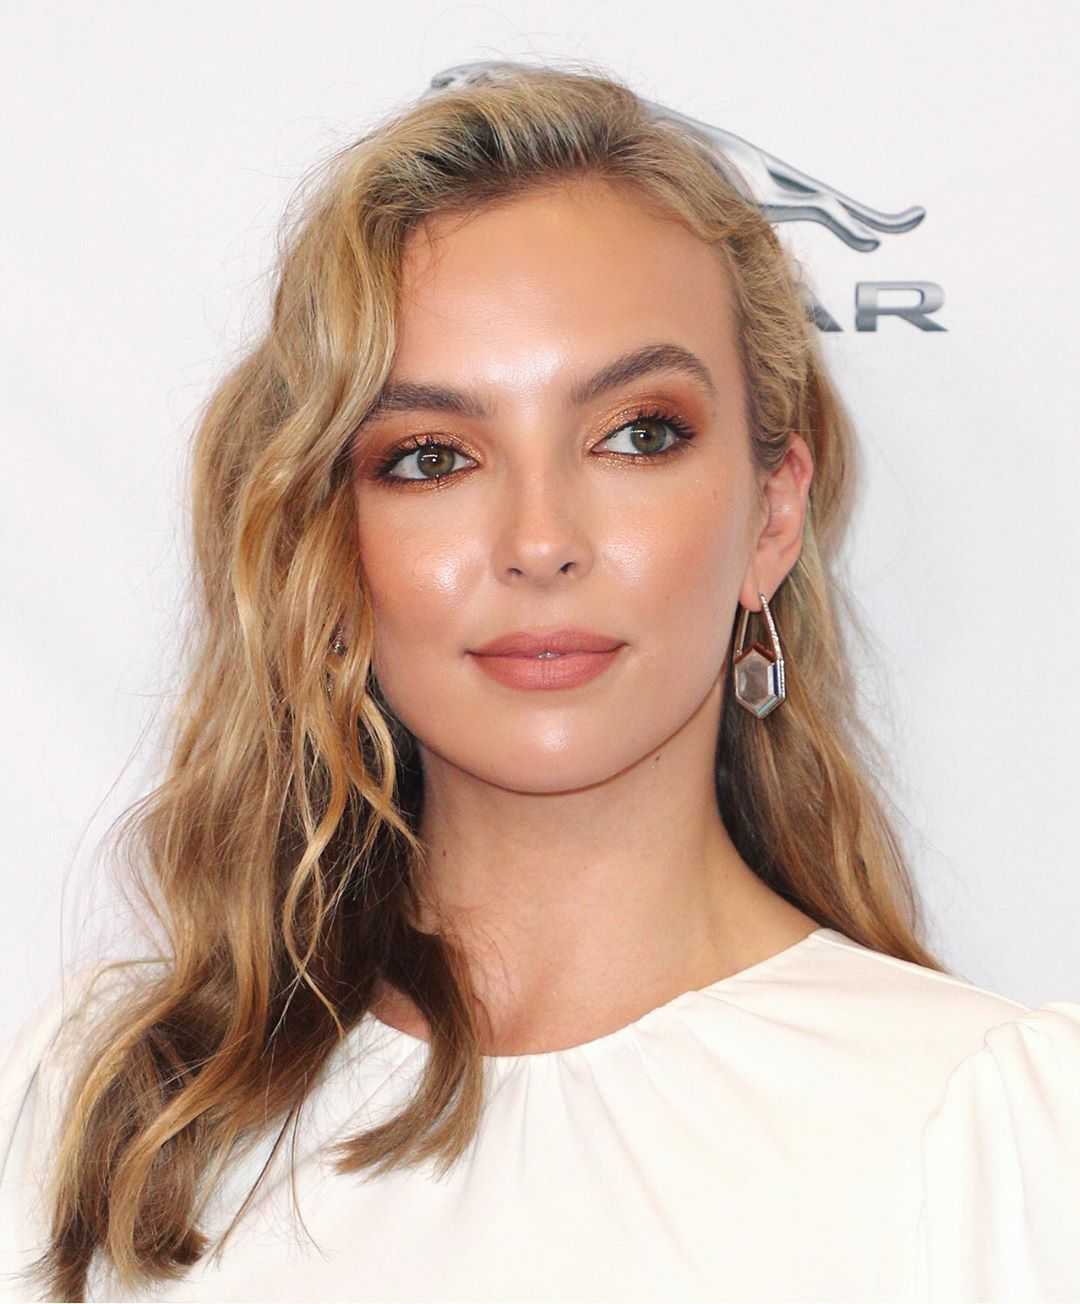 70+ Hot Pictures Of Jodie Comer Which Will Make You Sweat All Over 225